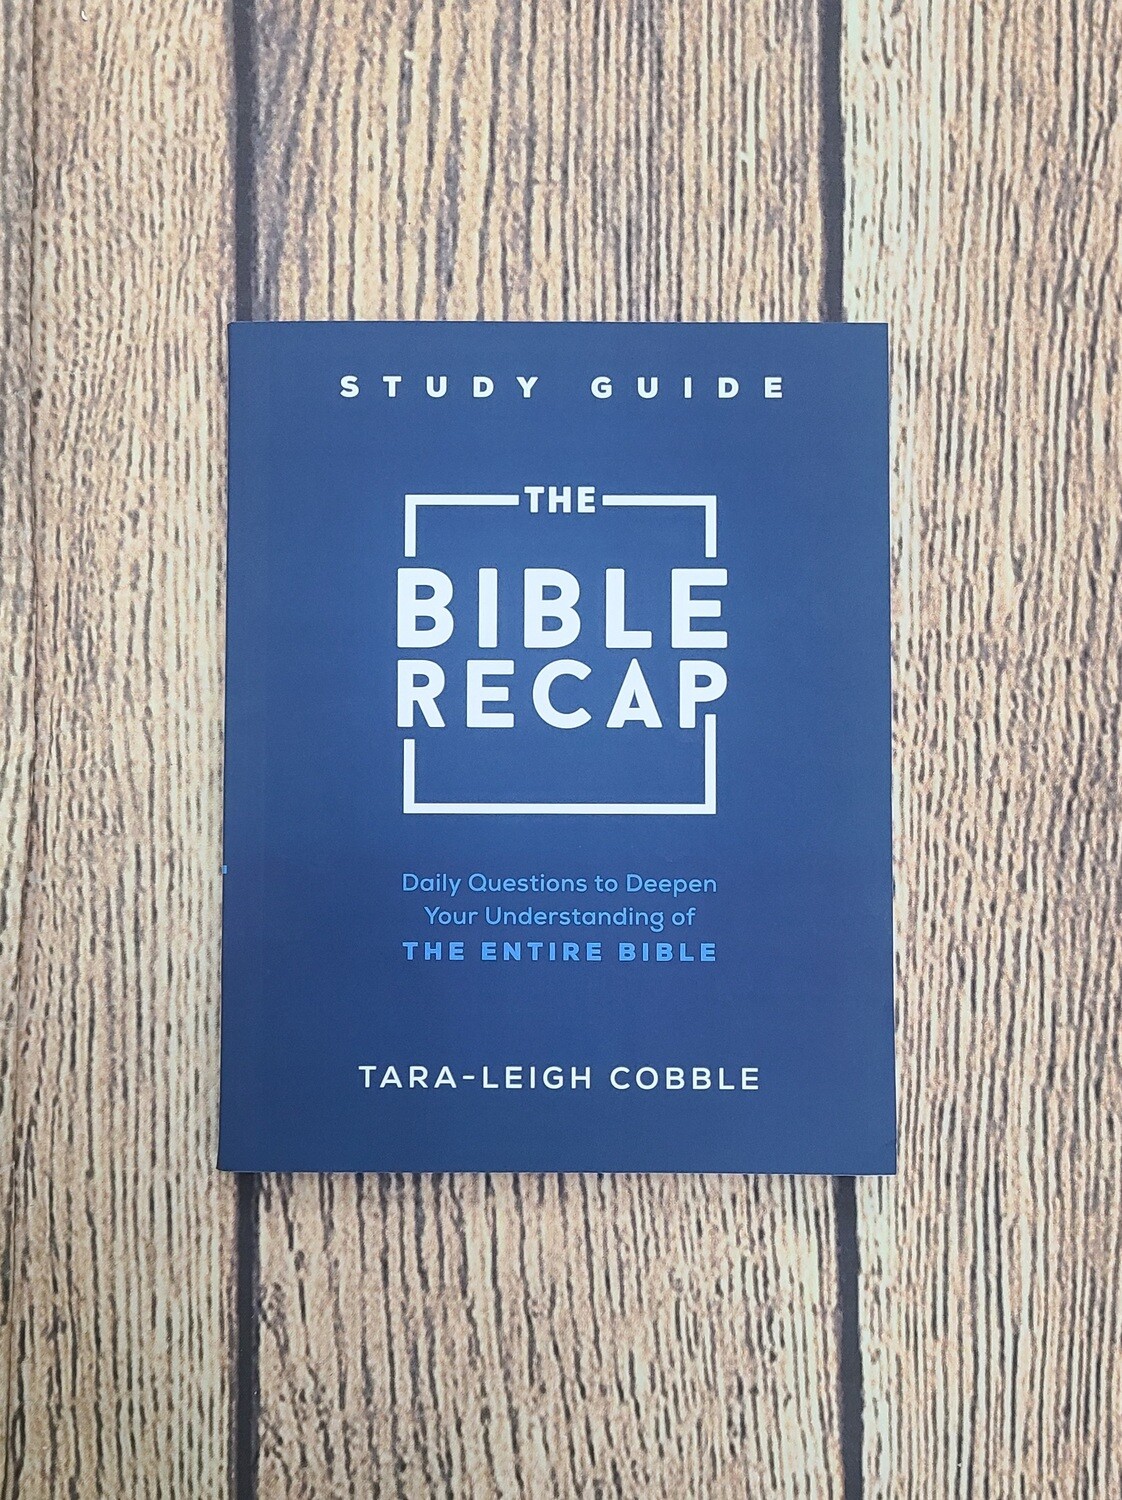 The Bible Recap Study Guide: Daily Questions to Deepen Your Understanding of The Entire Bible by Tara-Leigh Cobble